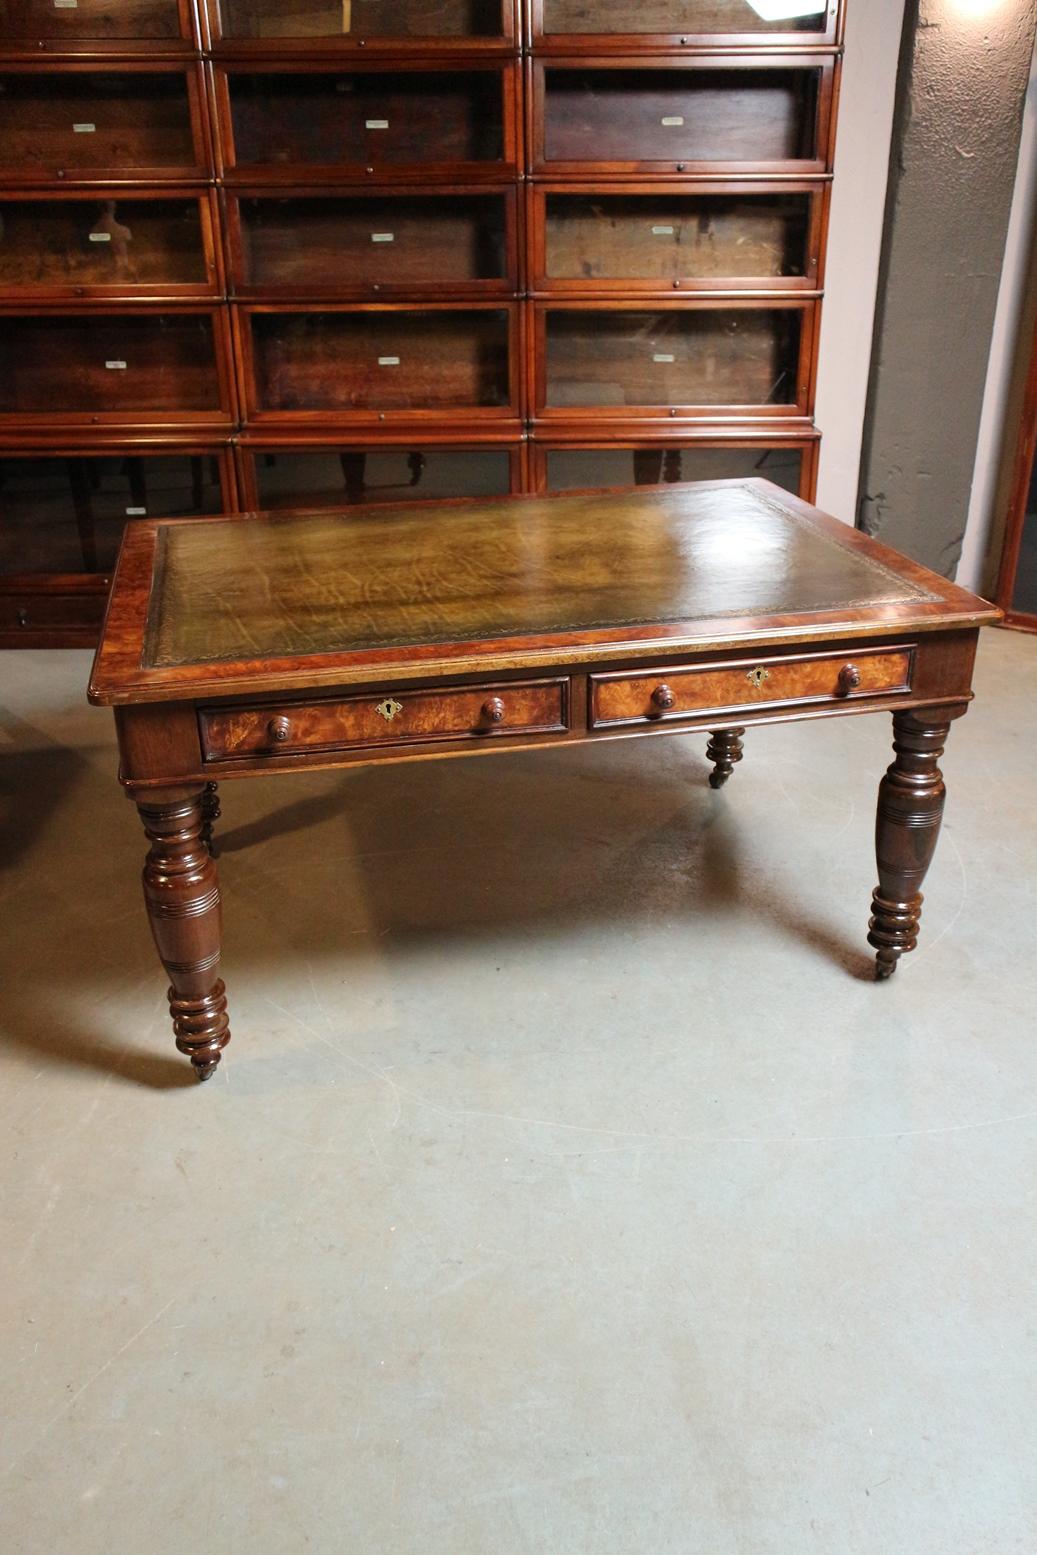 Beautiful antique burr walnut combined with mahogany writing table. The table has 2 drawers on both sides. Table stands on porcelain wheels. Green gold-tooled leather top. Nice warm color.
Origin: England, ca. 1840 In good and complete original